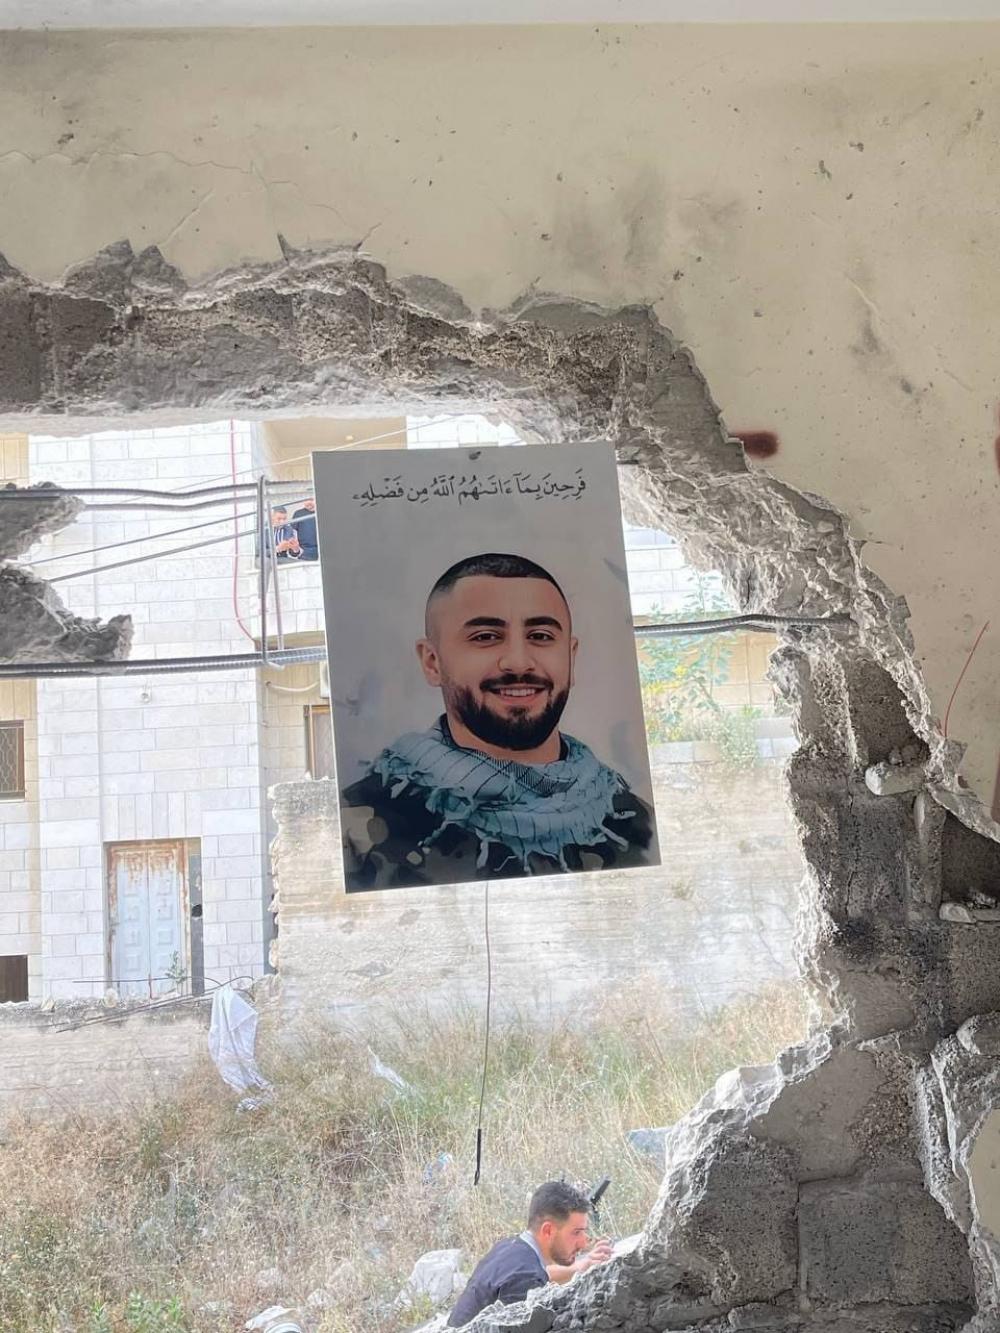 The house of the martyr Moataz Al-Khawaja in Ni'lin is destroyed by the occupation